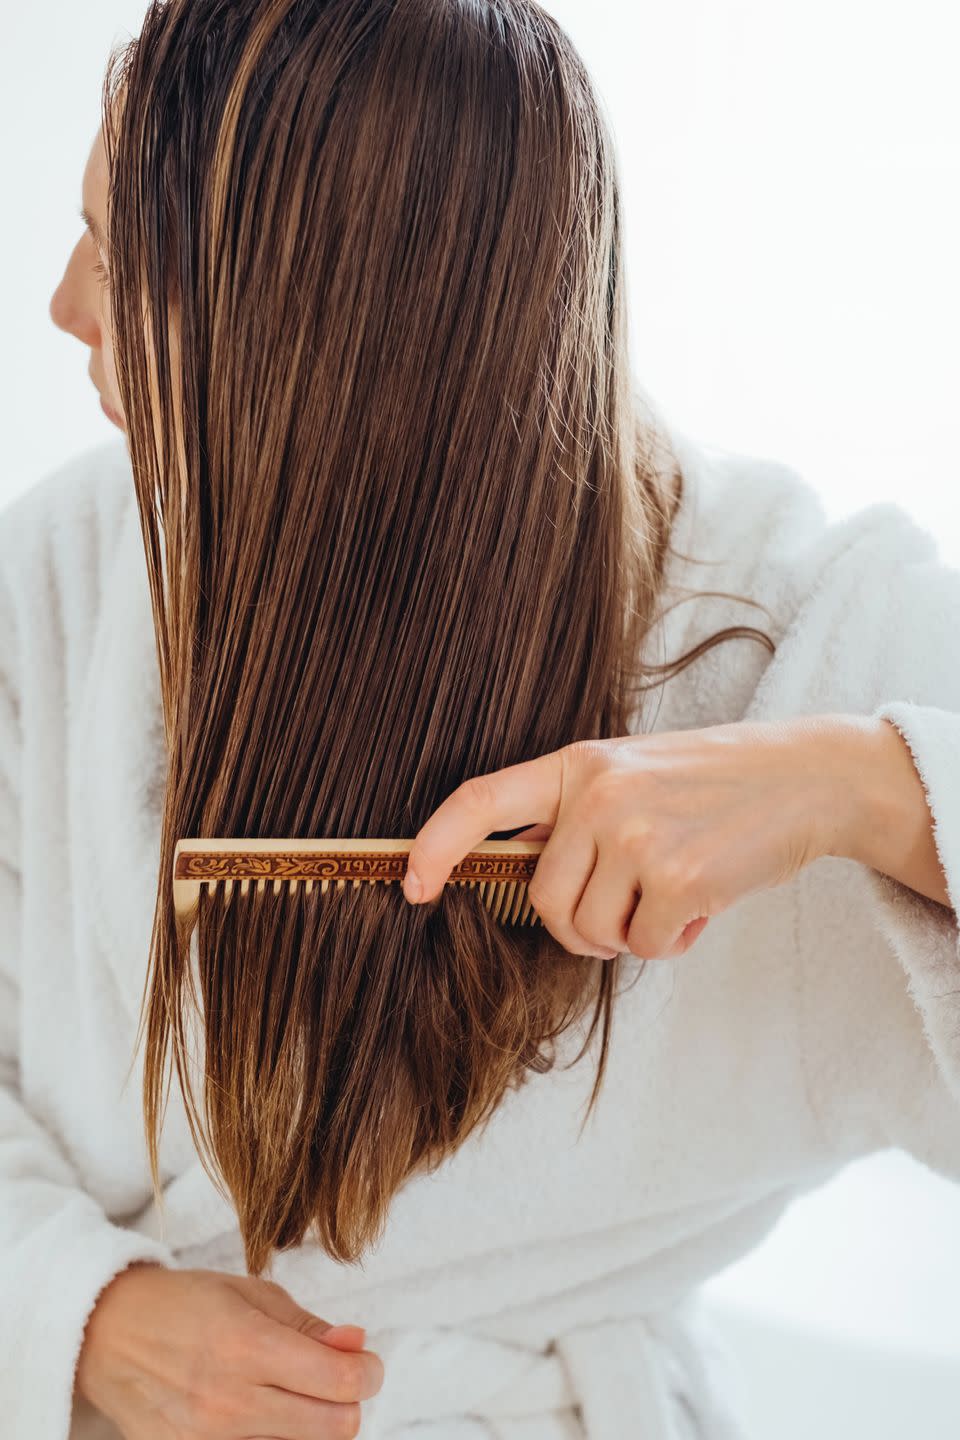 girl carefully combing her hair with a wooden comb